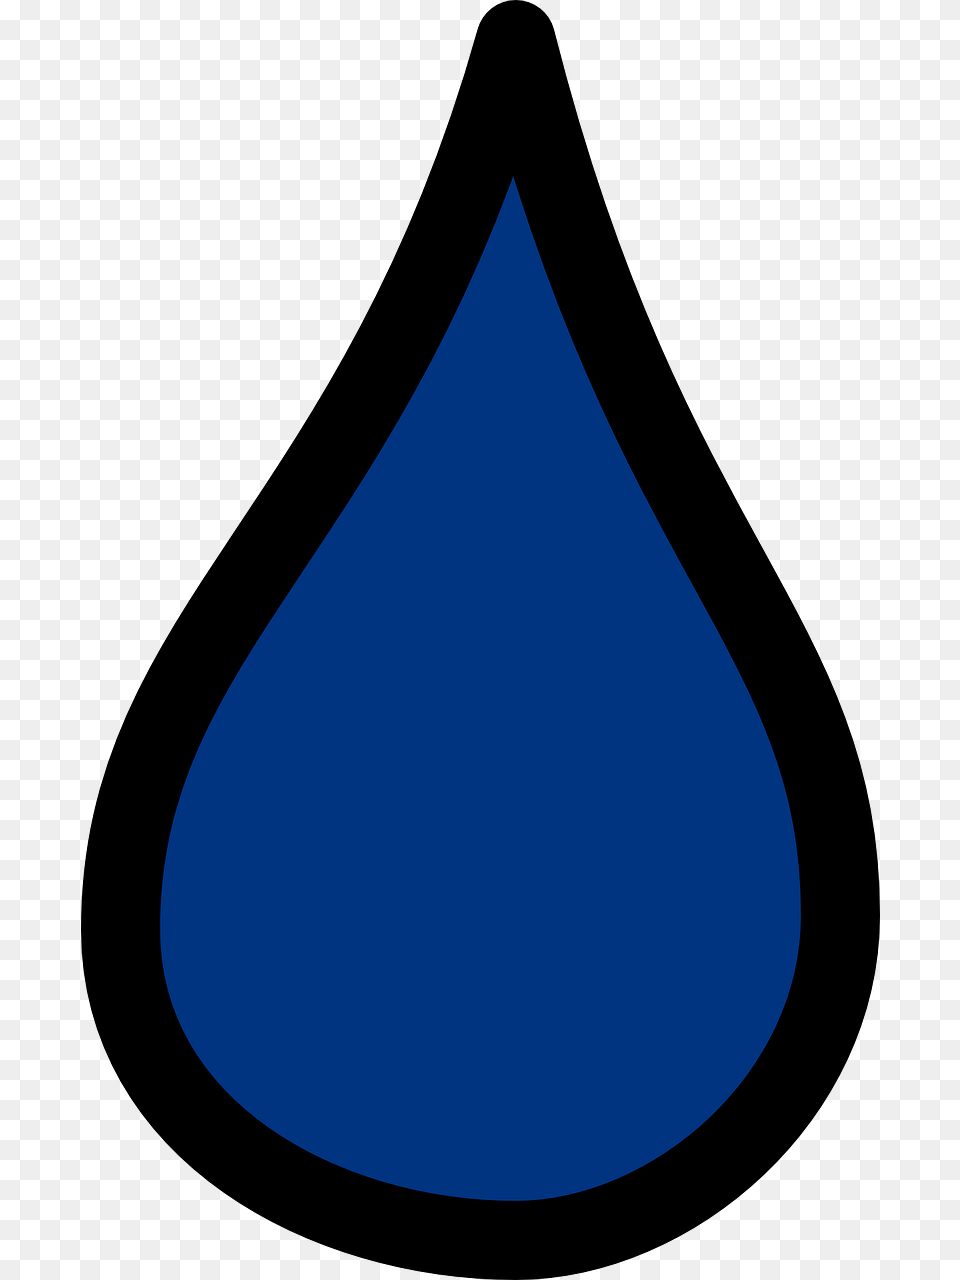 Blue Teardrop, Droplet, Triangle, Astronomy, Moon Free Transparent Png